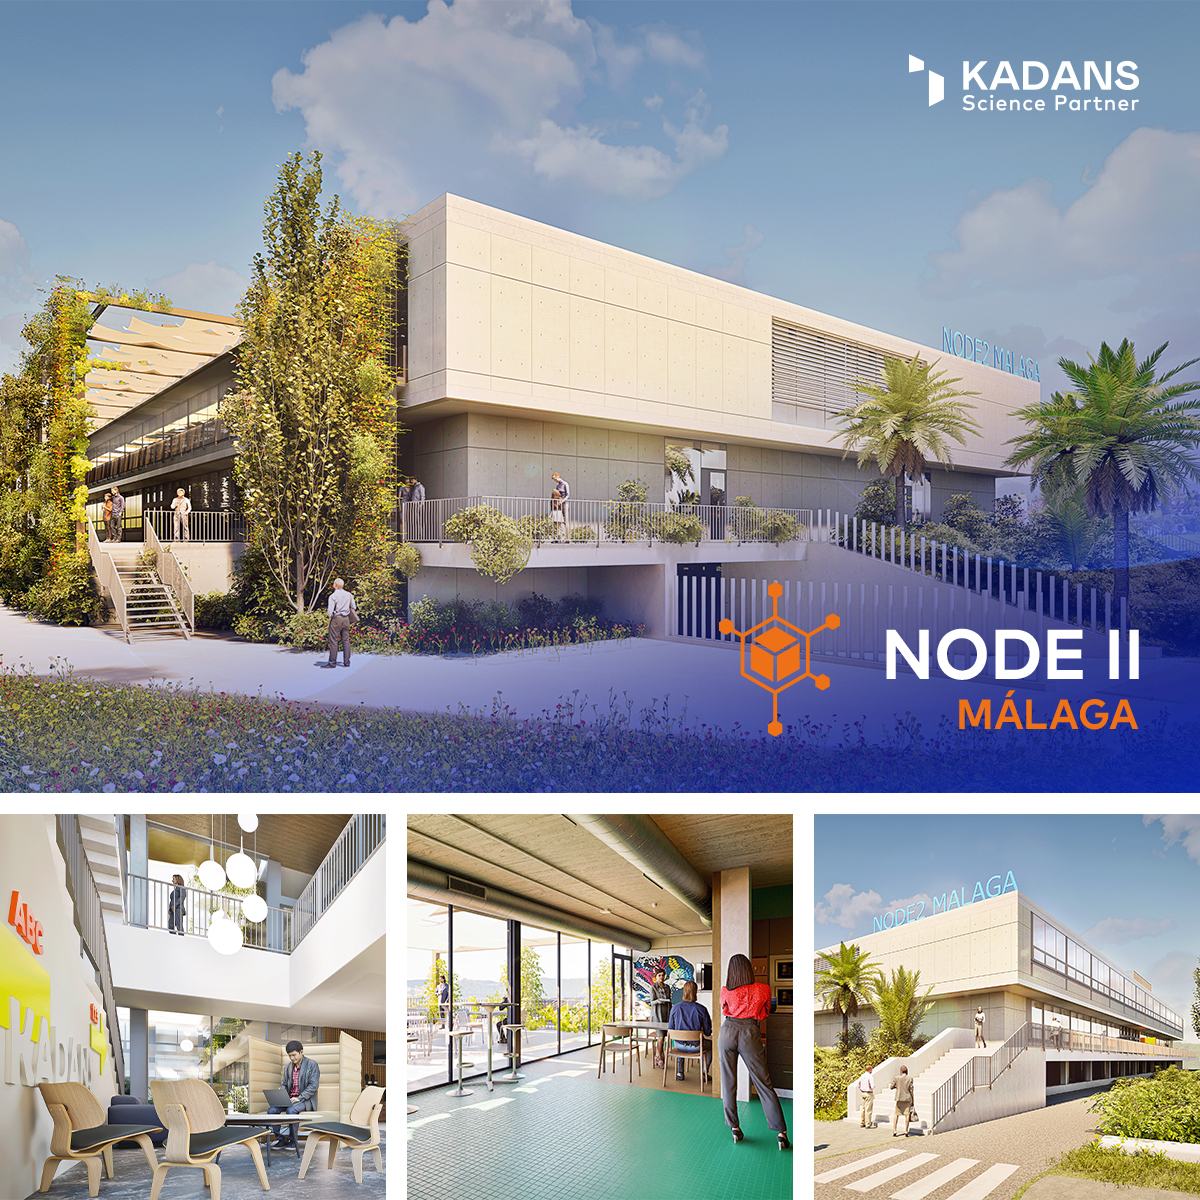 🚀 Exciting expansion with NODE II in Málaga Tech Park Our latest acquisition in Málaga Tech Park boasts 3,800 square meters of leasable space and is dedicated to attracting leading-edge companies to the vibrant ecosystem of Málaga Tech Park. kadans.es/kadans-science…